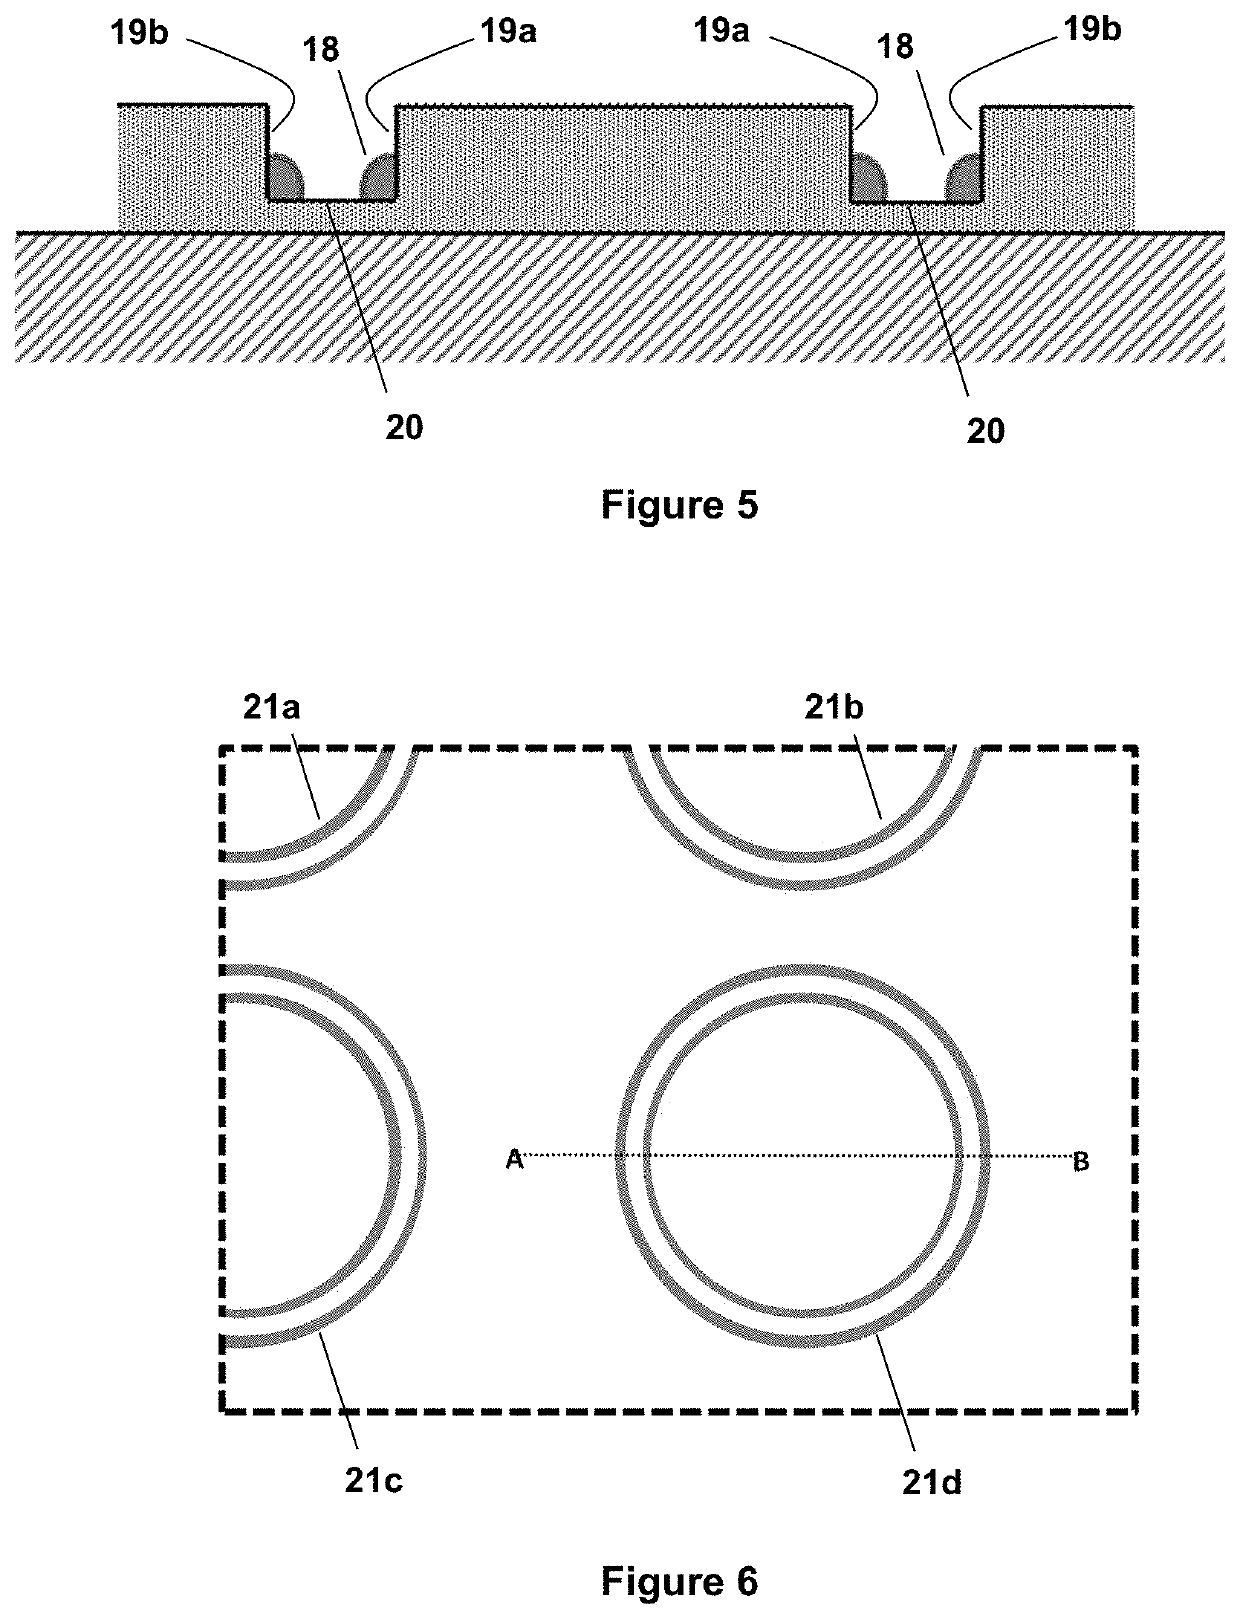 Method of producing micro-image elements on a substrate